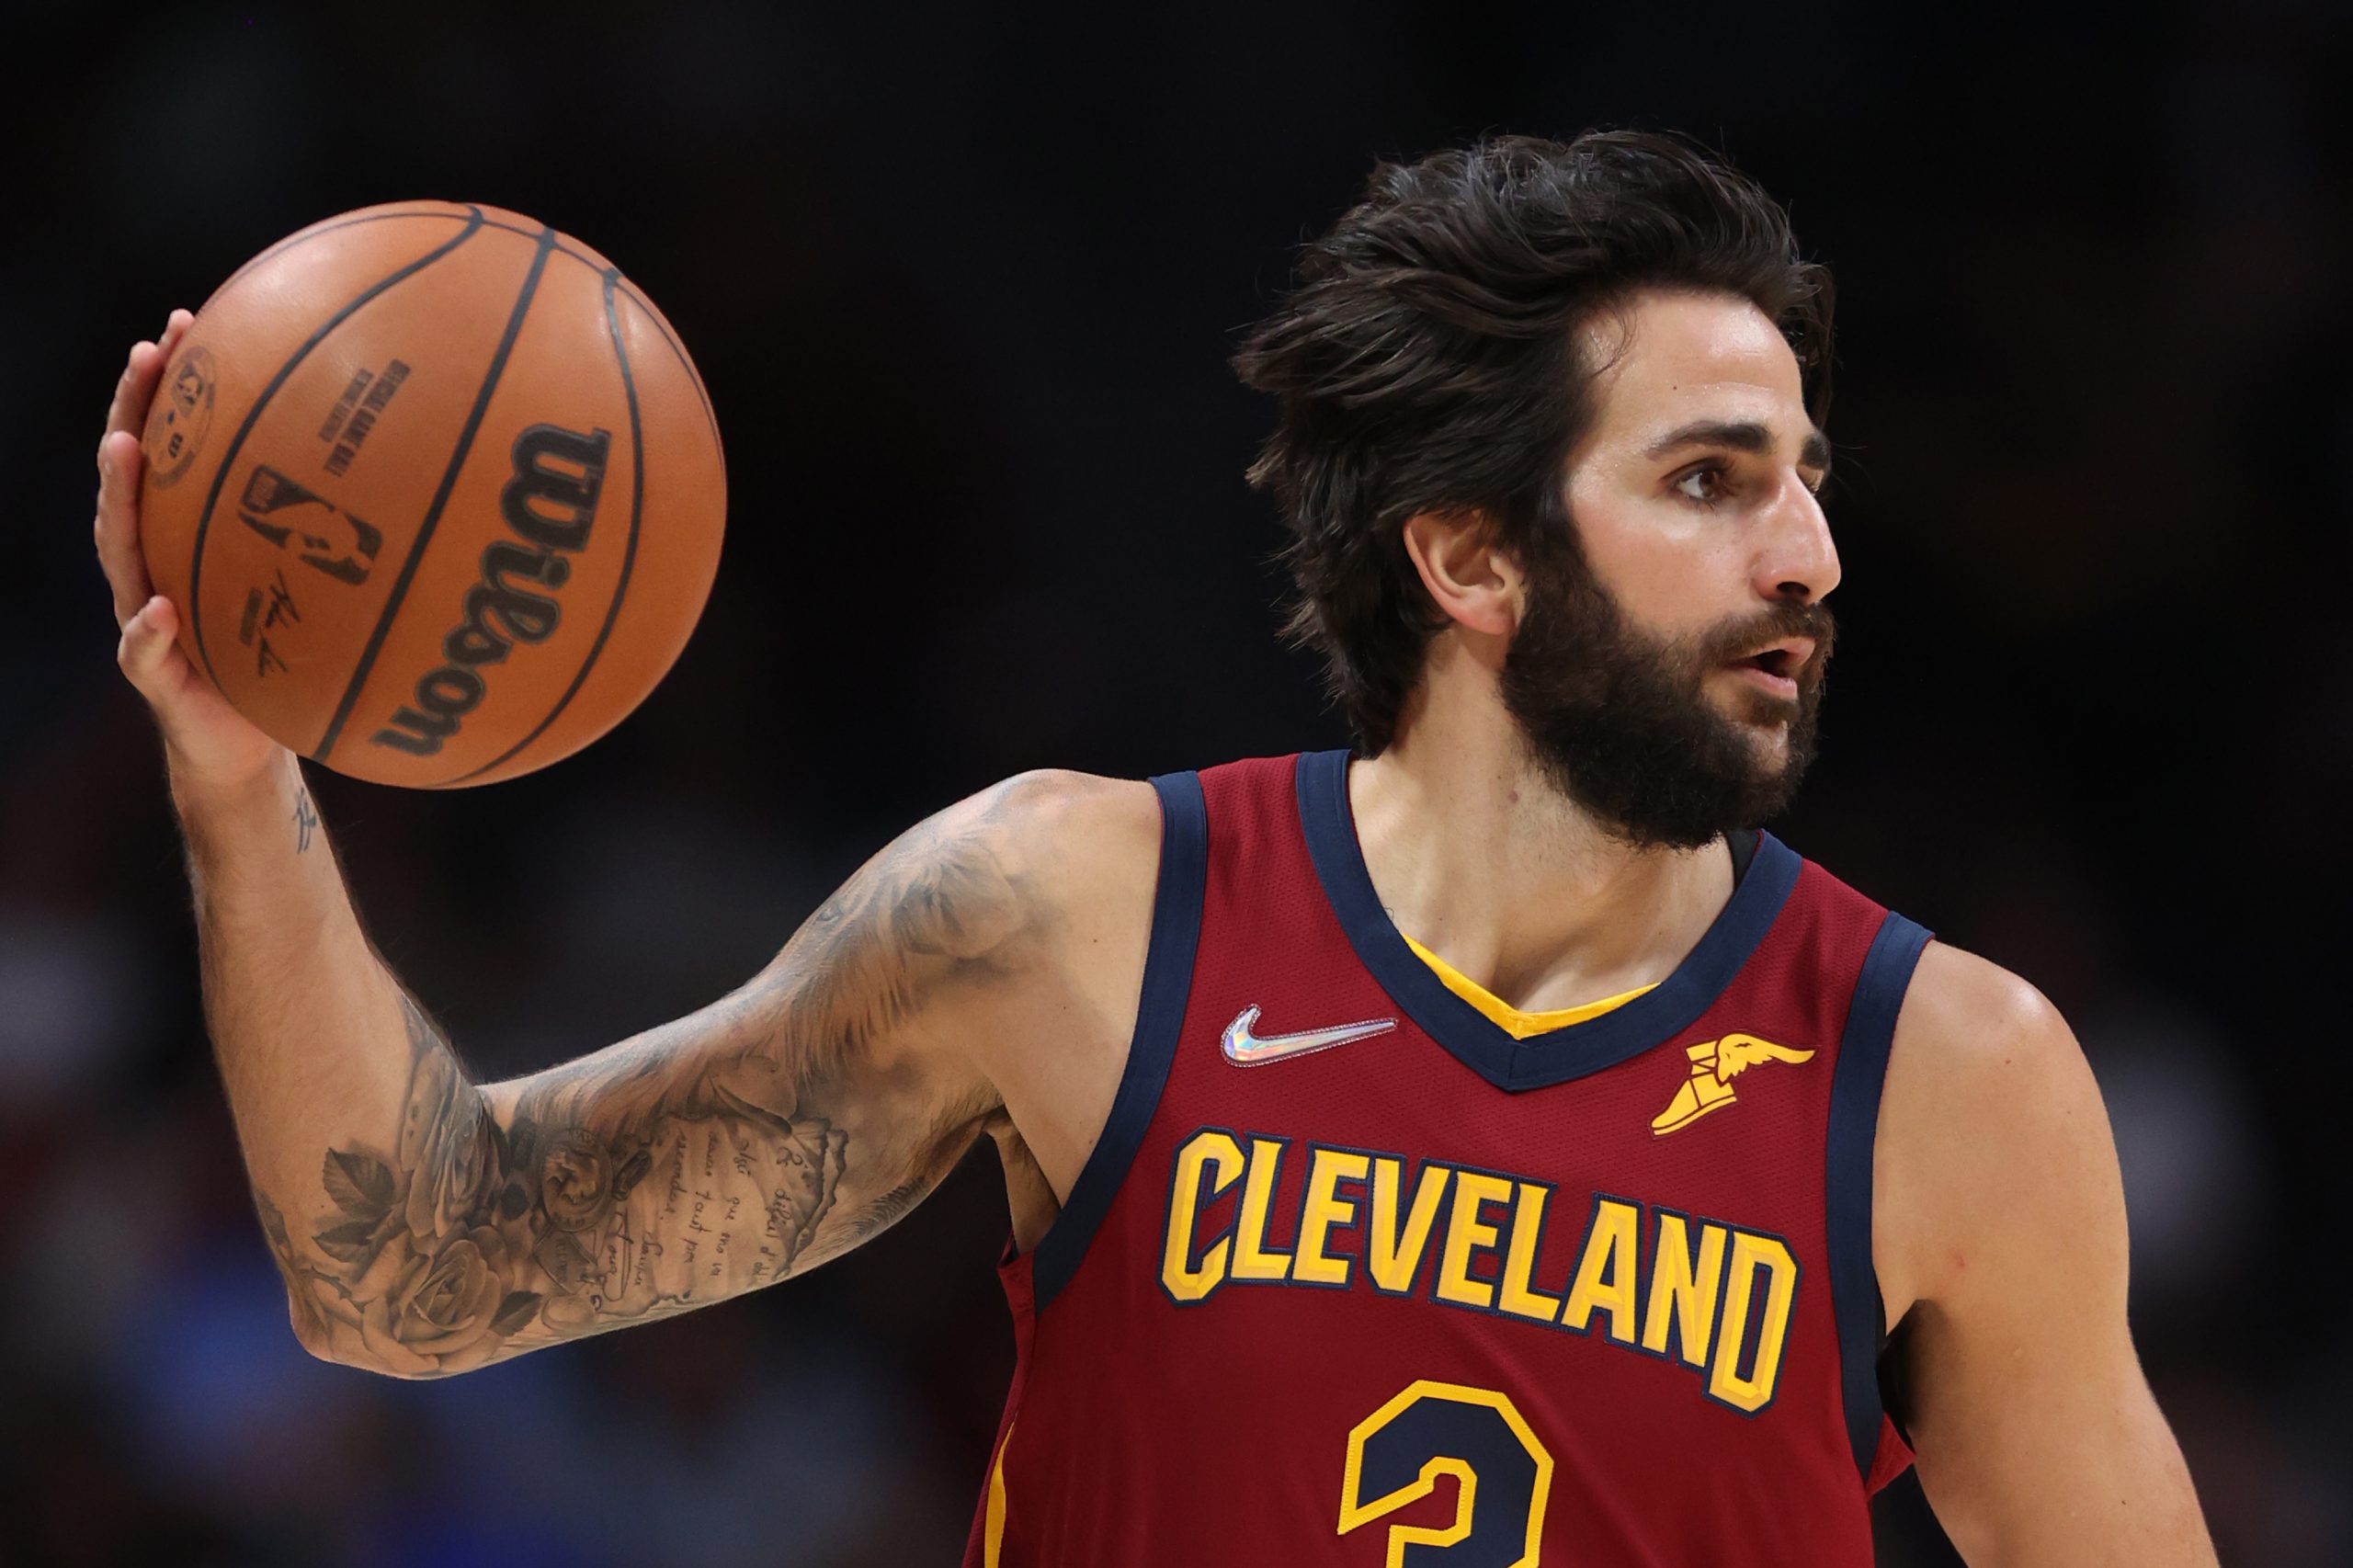 Ricky Rubio 2021 - Net Worth, Salary, Records, and Endorsements